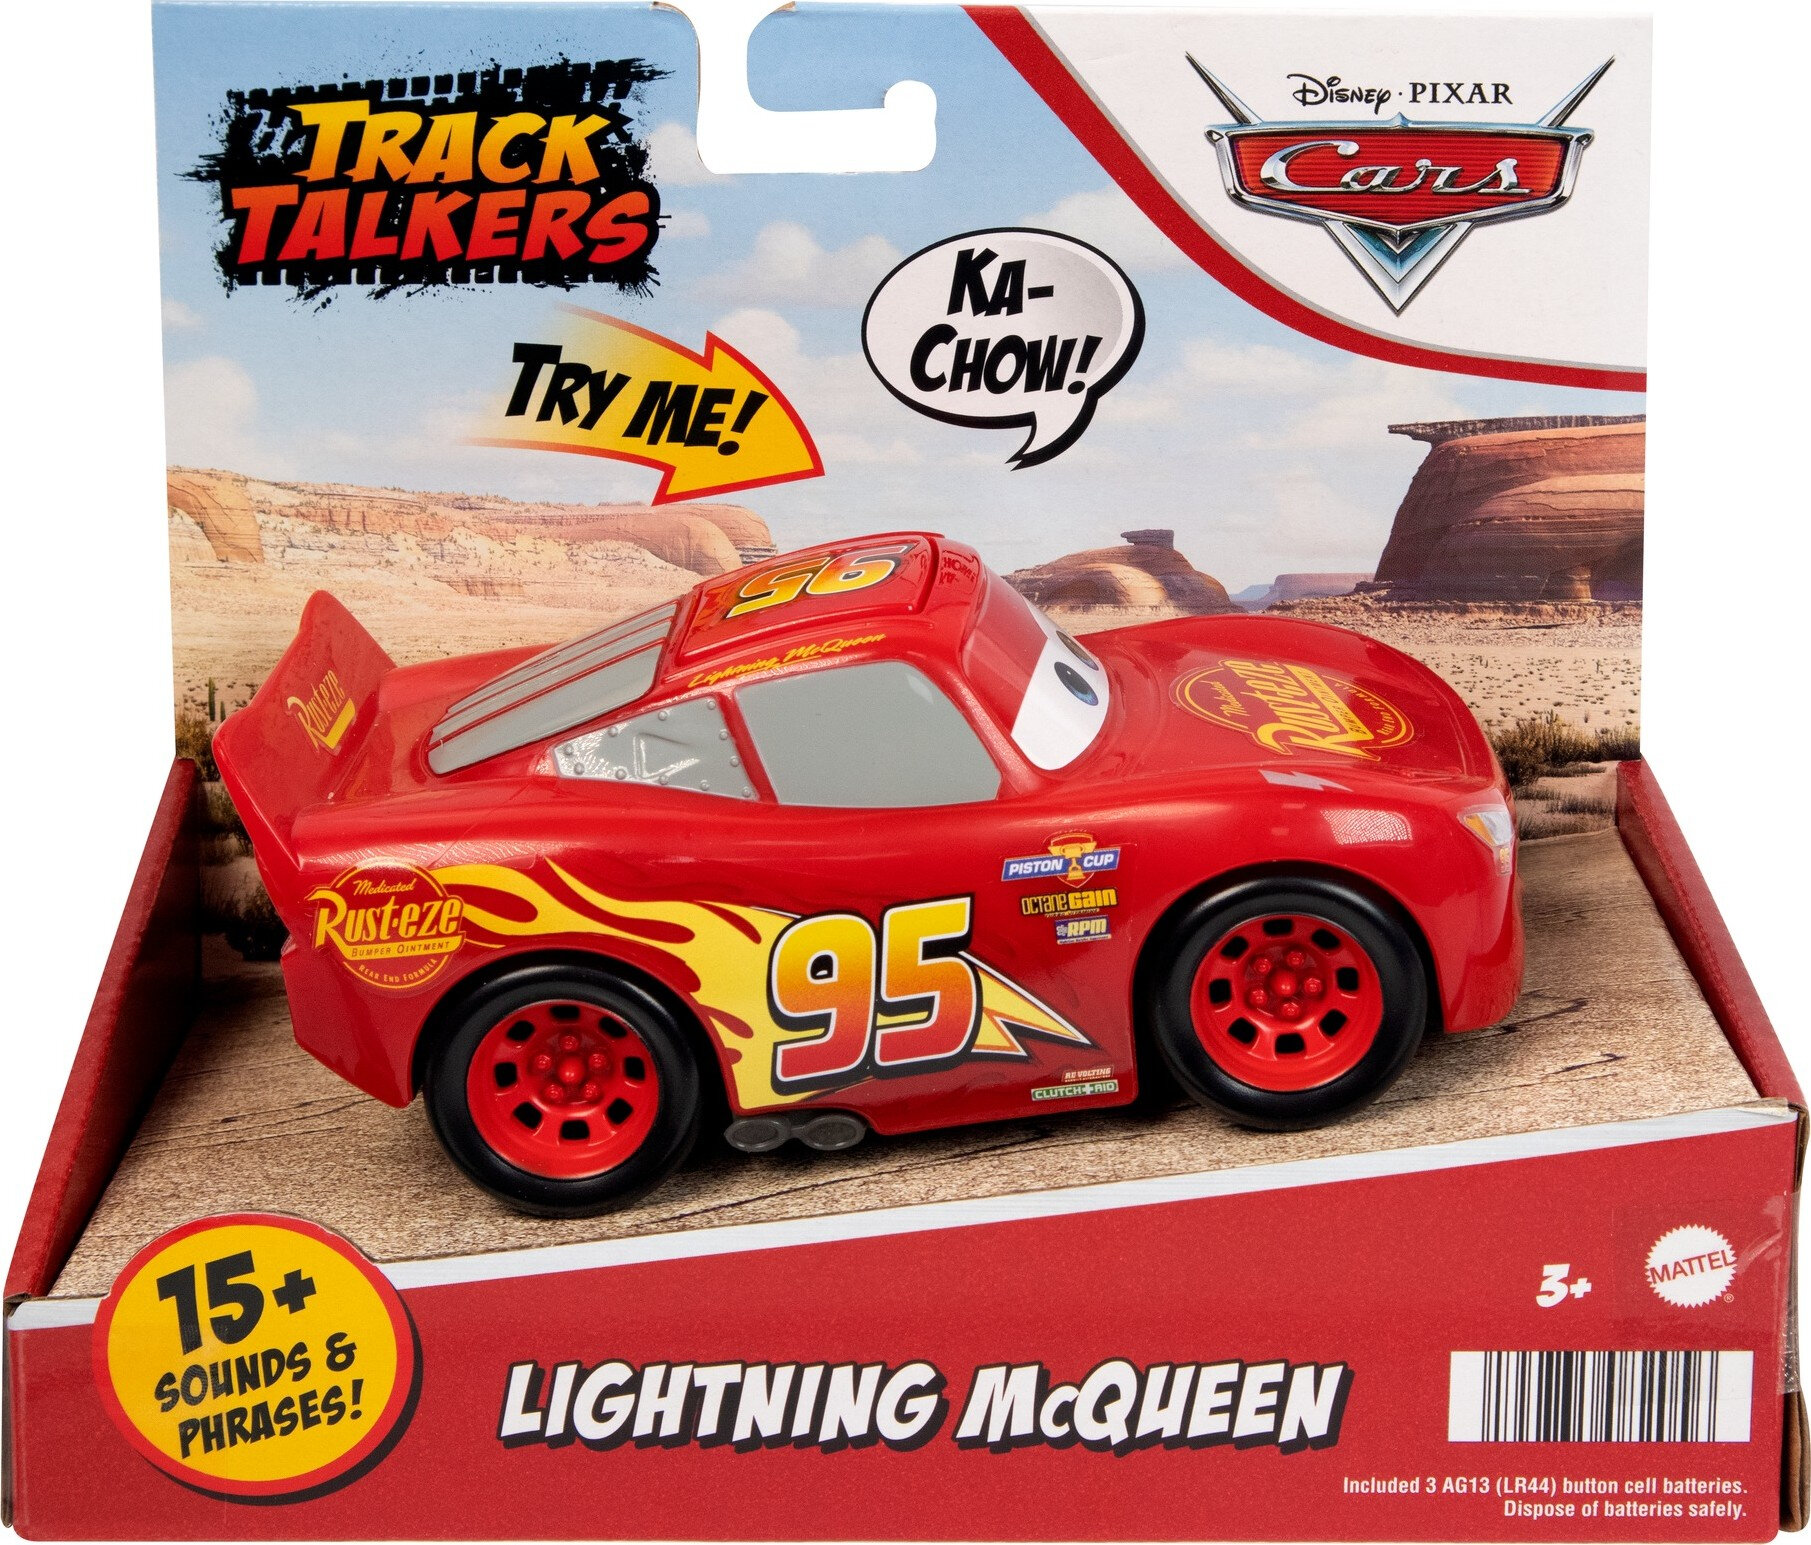 Disney and Pixar Cars Track Talkers Lightning McQueen Talking Toy Car, 5.5  inch Collectible